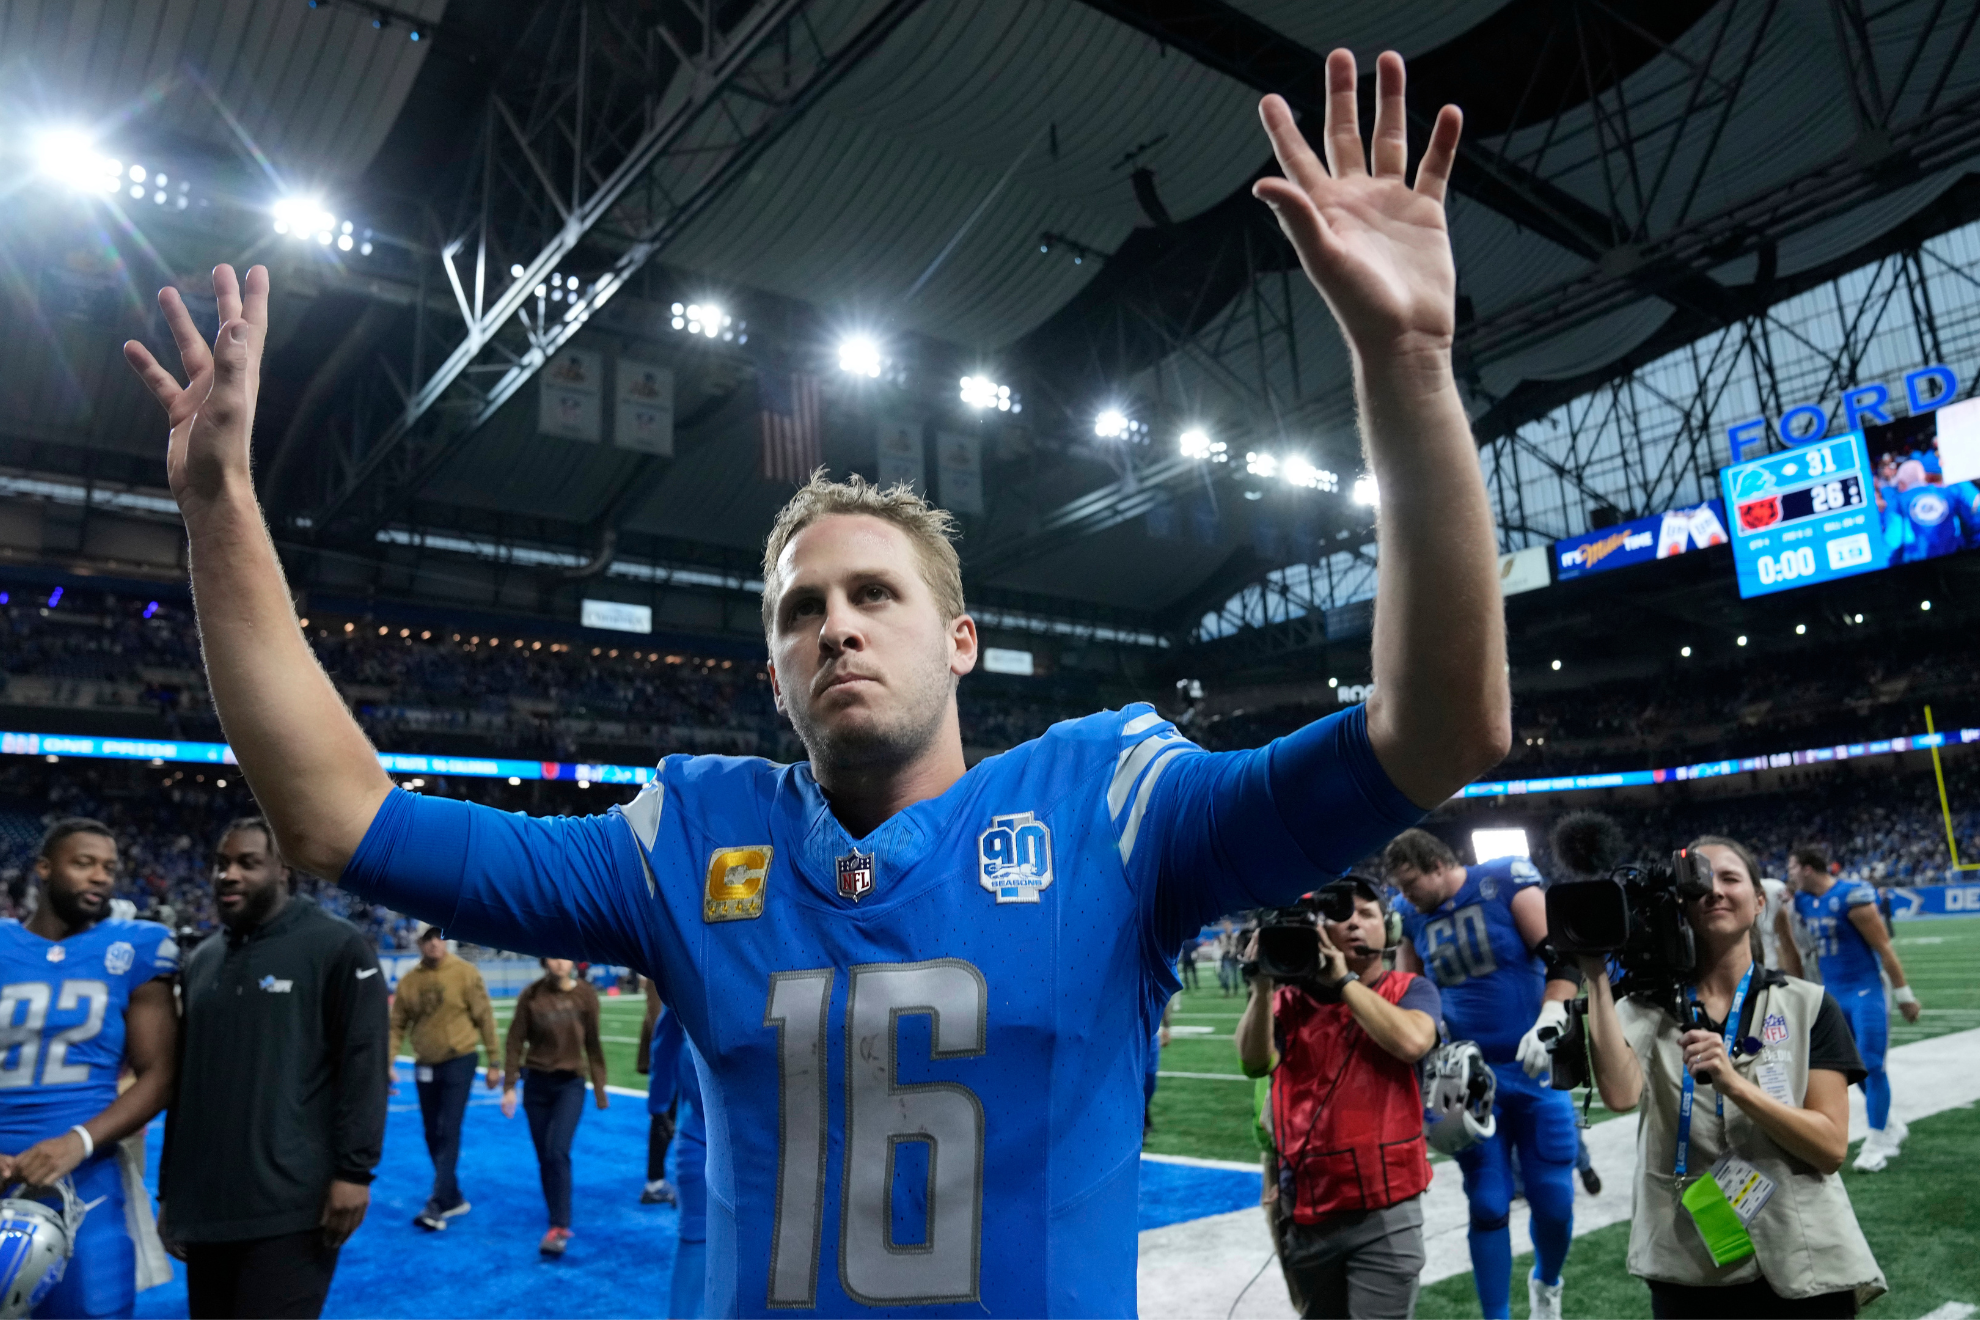 This Thanksgiving, Jared Goff and the Lions can solidify their position atop the NFC North.